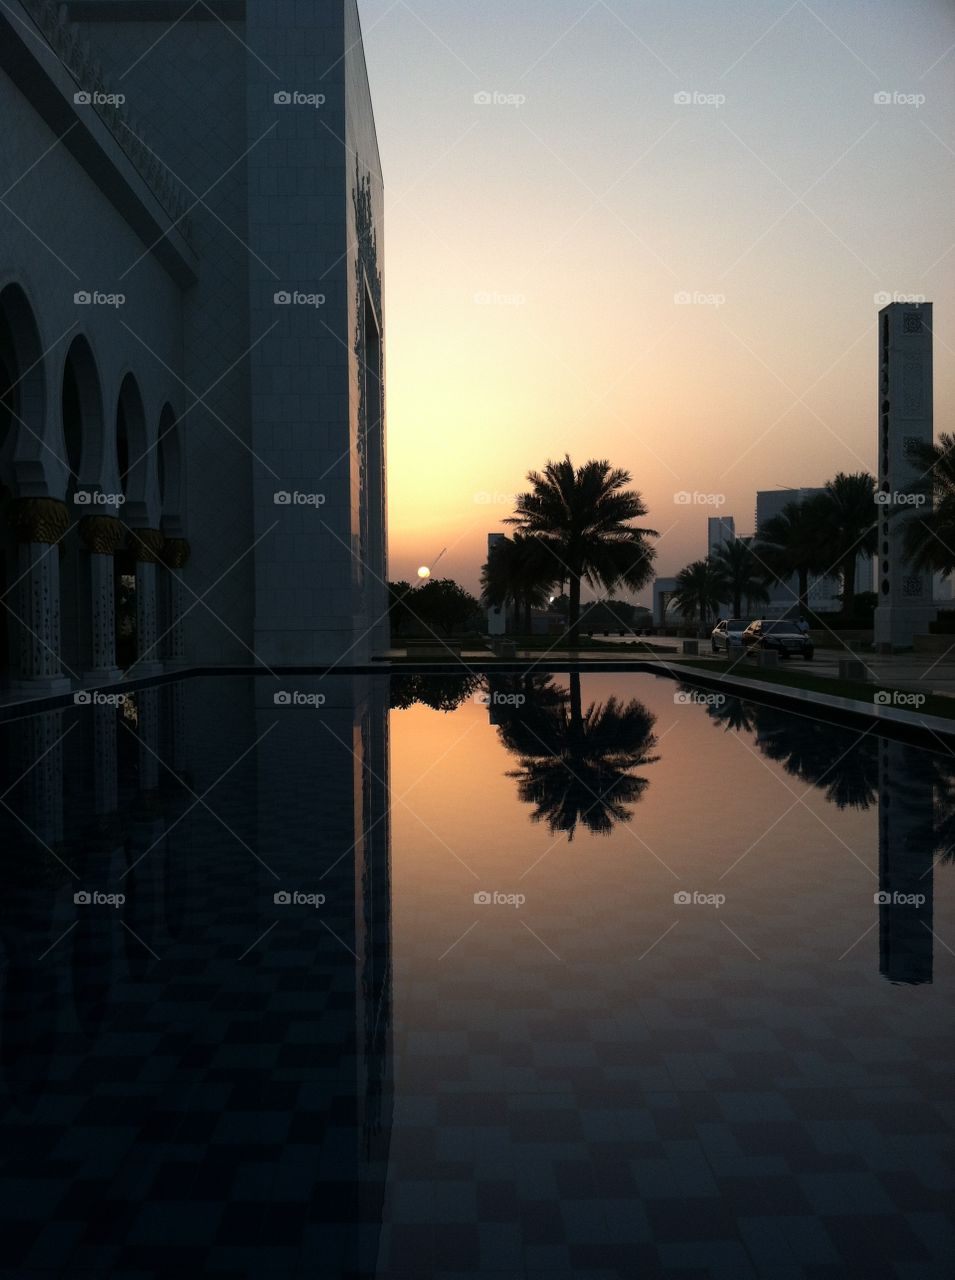 A palm tree silhouetted against the sunset with a perfect reflection in a pool at the Grand Mosque in Abu Dhabi.